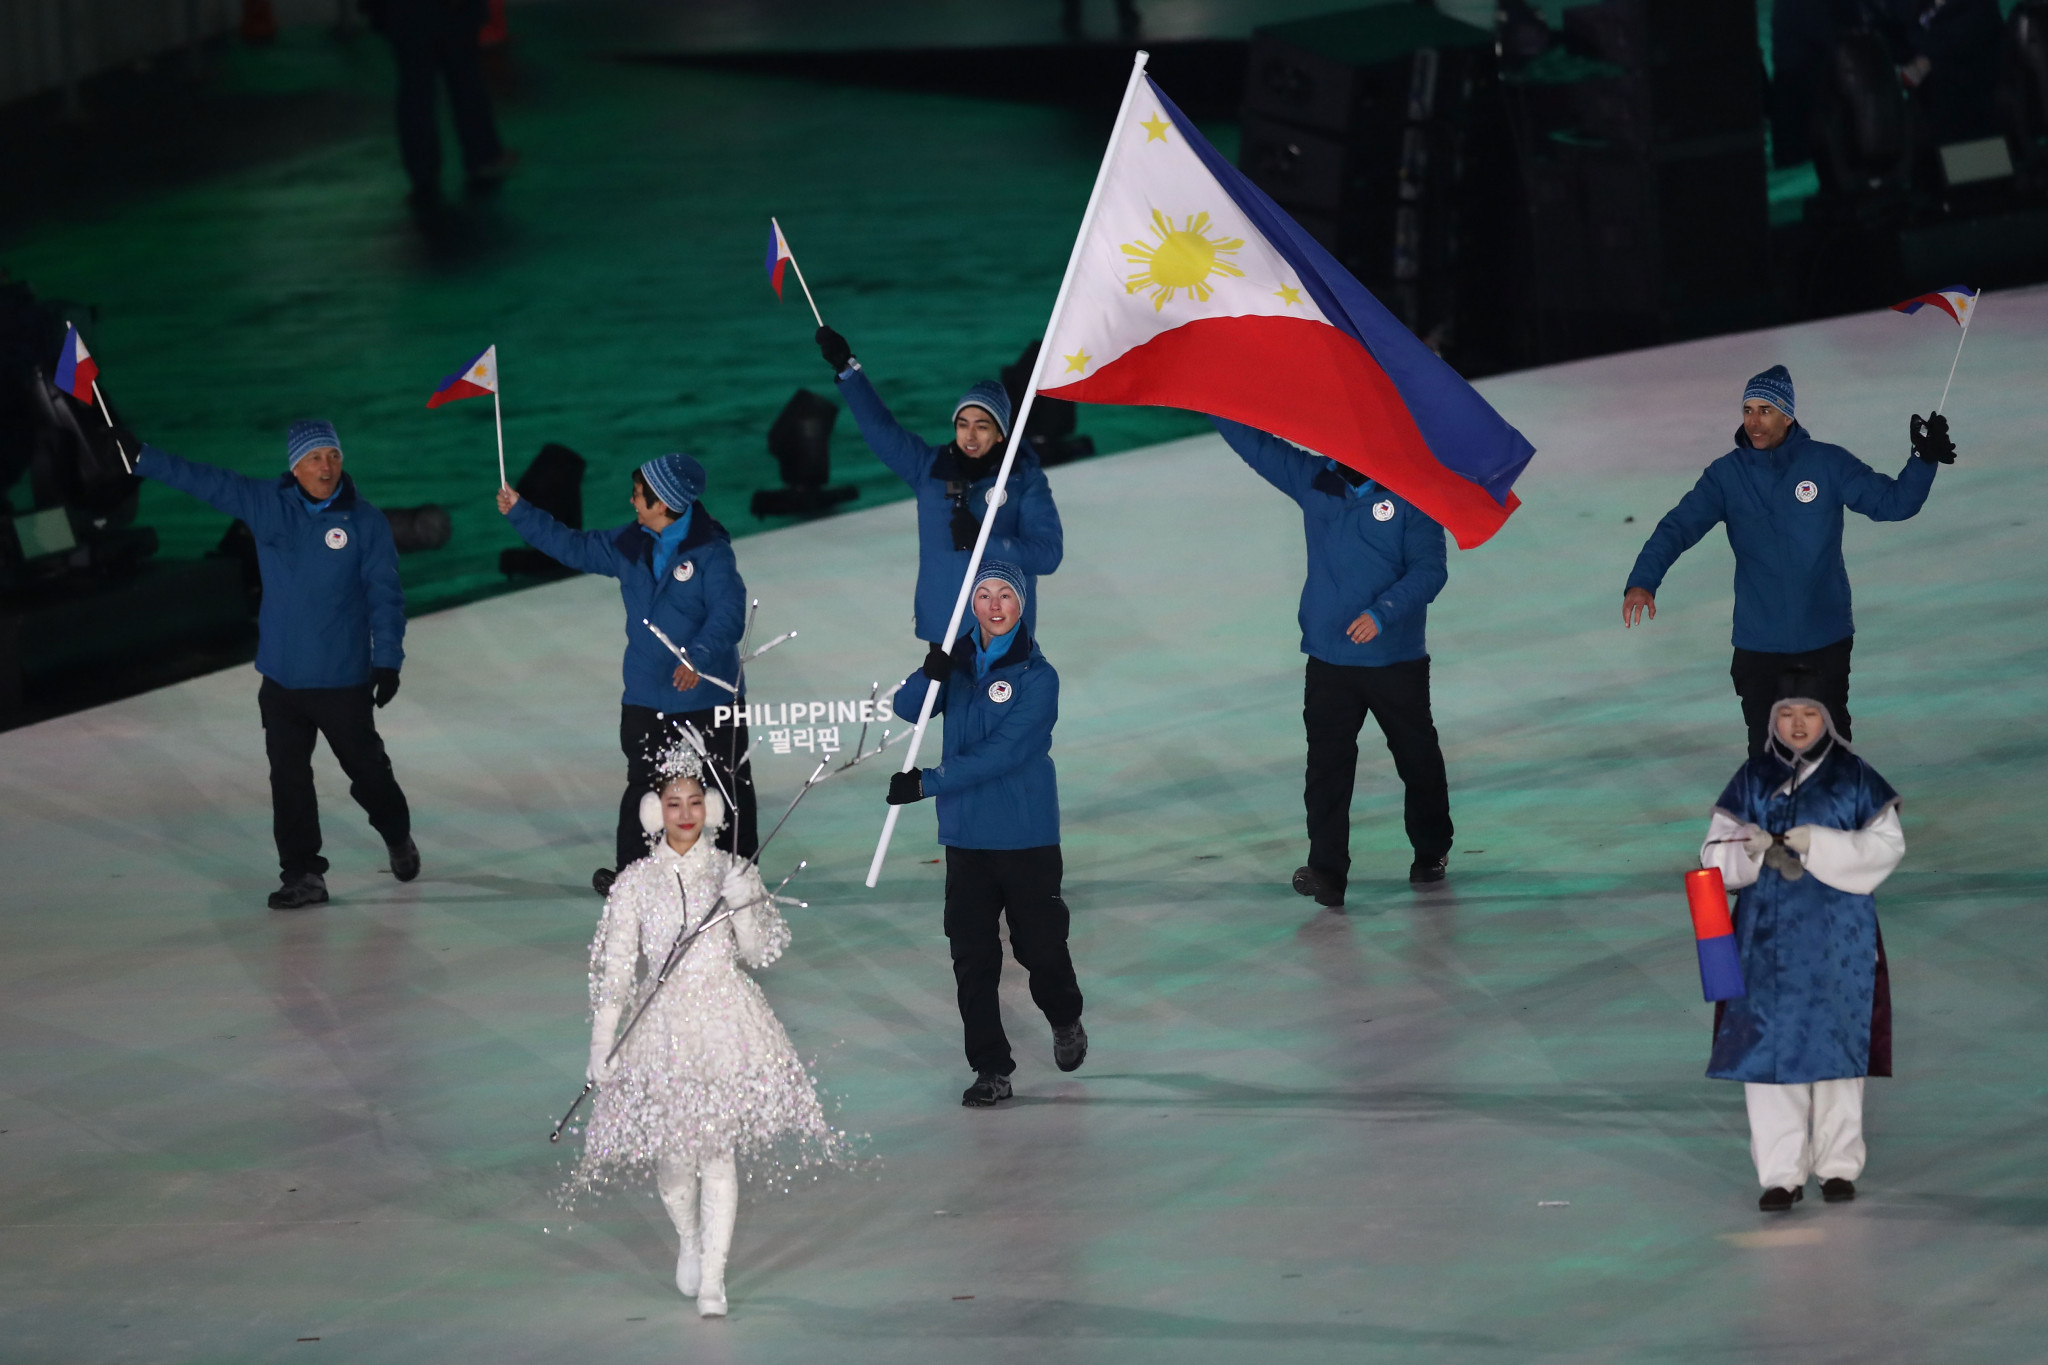 The Philippine Olympic Committee has called fresh elections for July 28 ©Getty Images